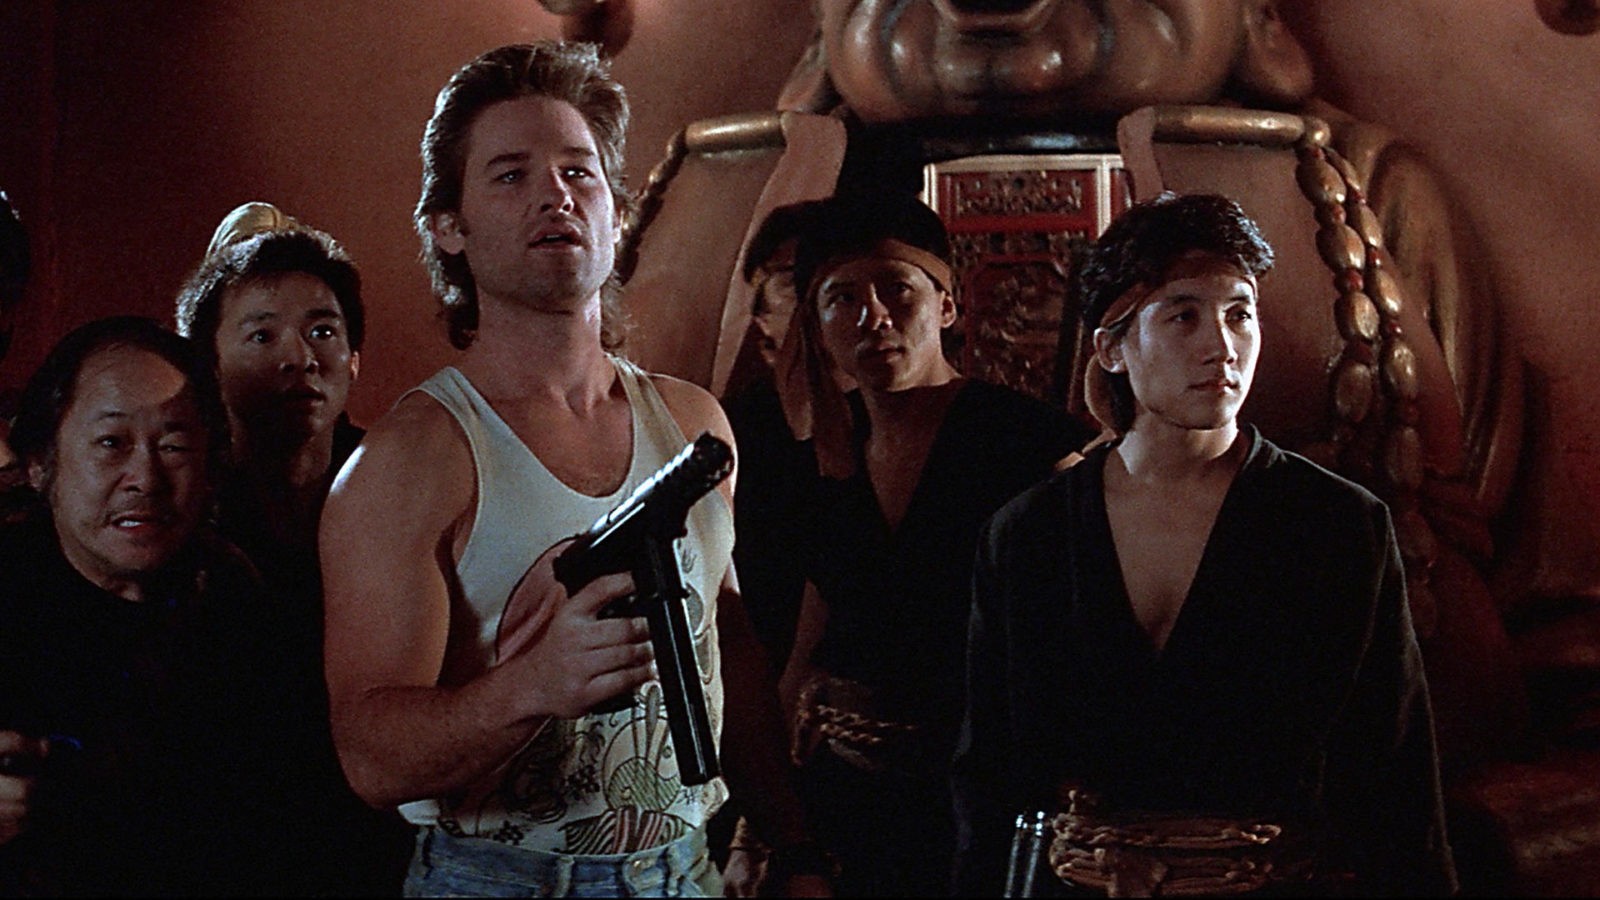 Big Trouble In Little China sequel